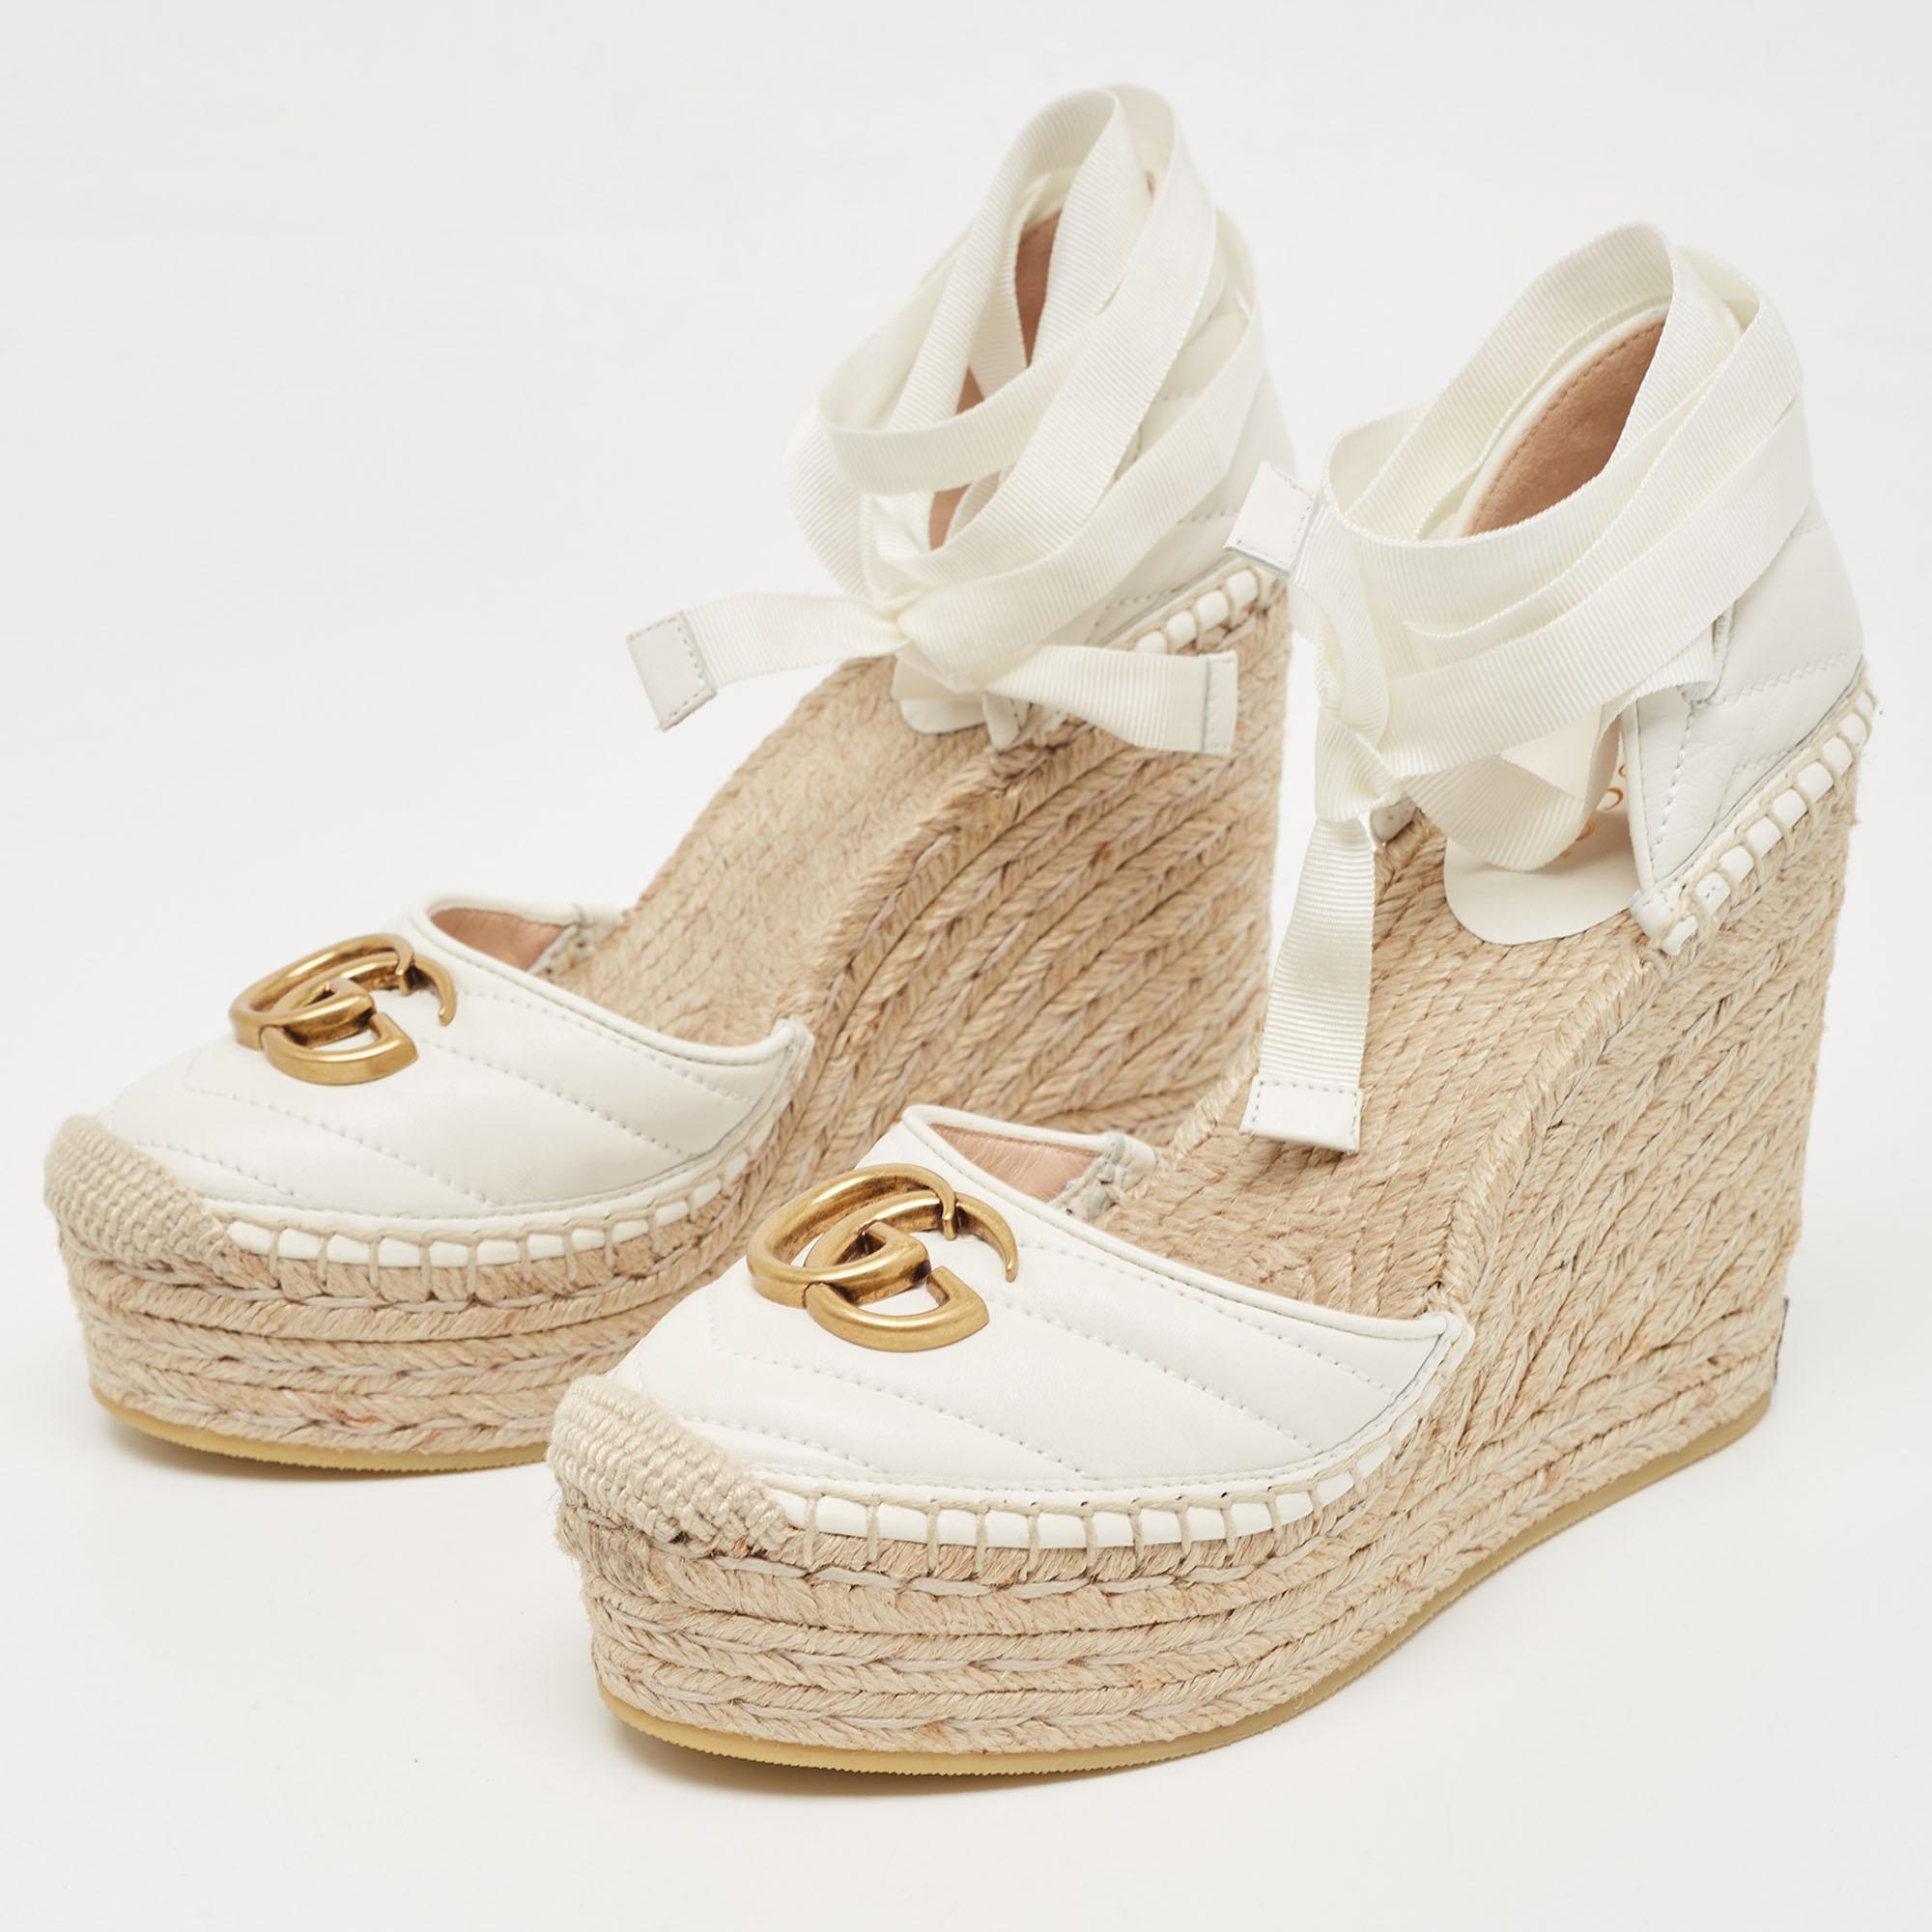 Gucci White Leather GG Marmont Wedge Sandals Size 37 4